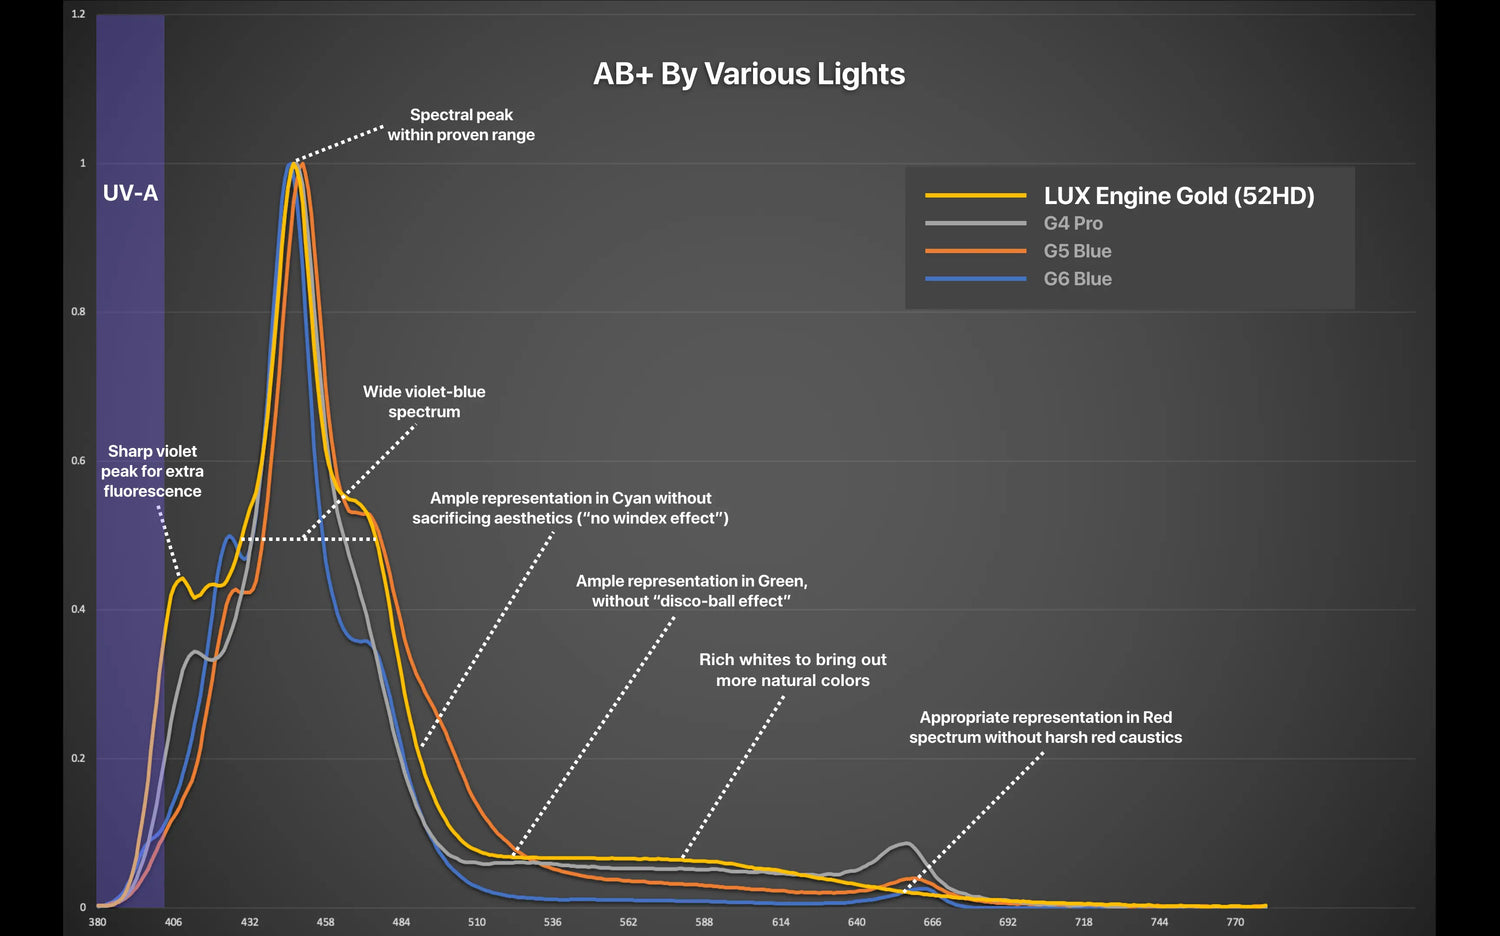 LUX Engine emits a spectrum comparable to Coral lab AB+ emitted by more expensive lights.